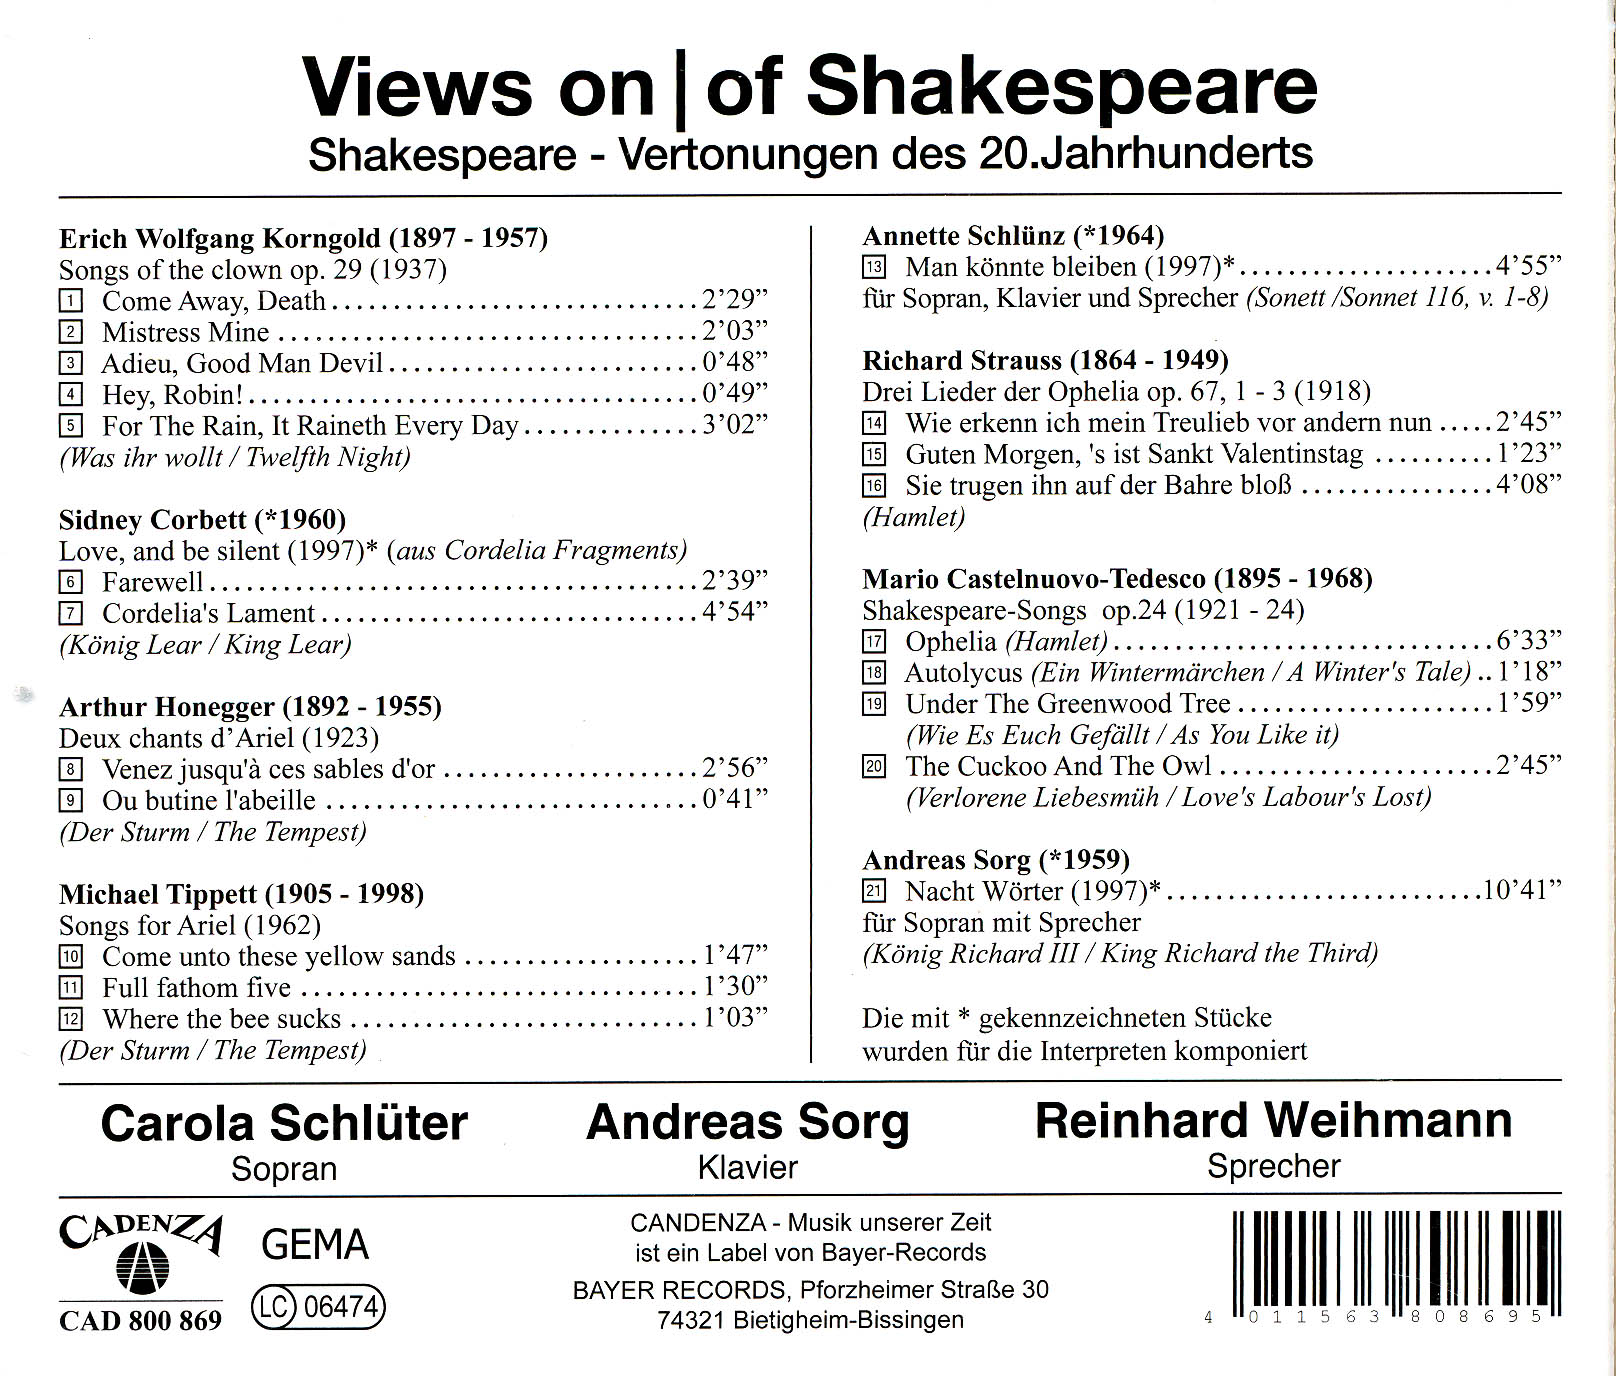 Views on/of Shakespeare